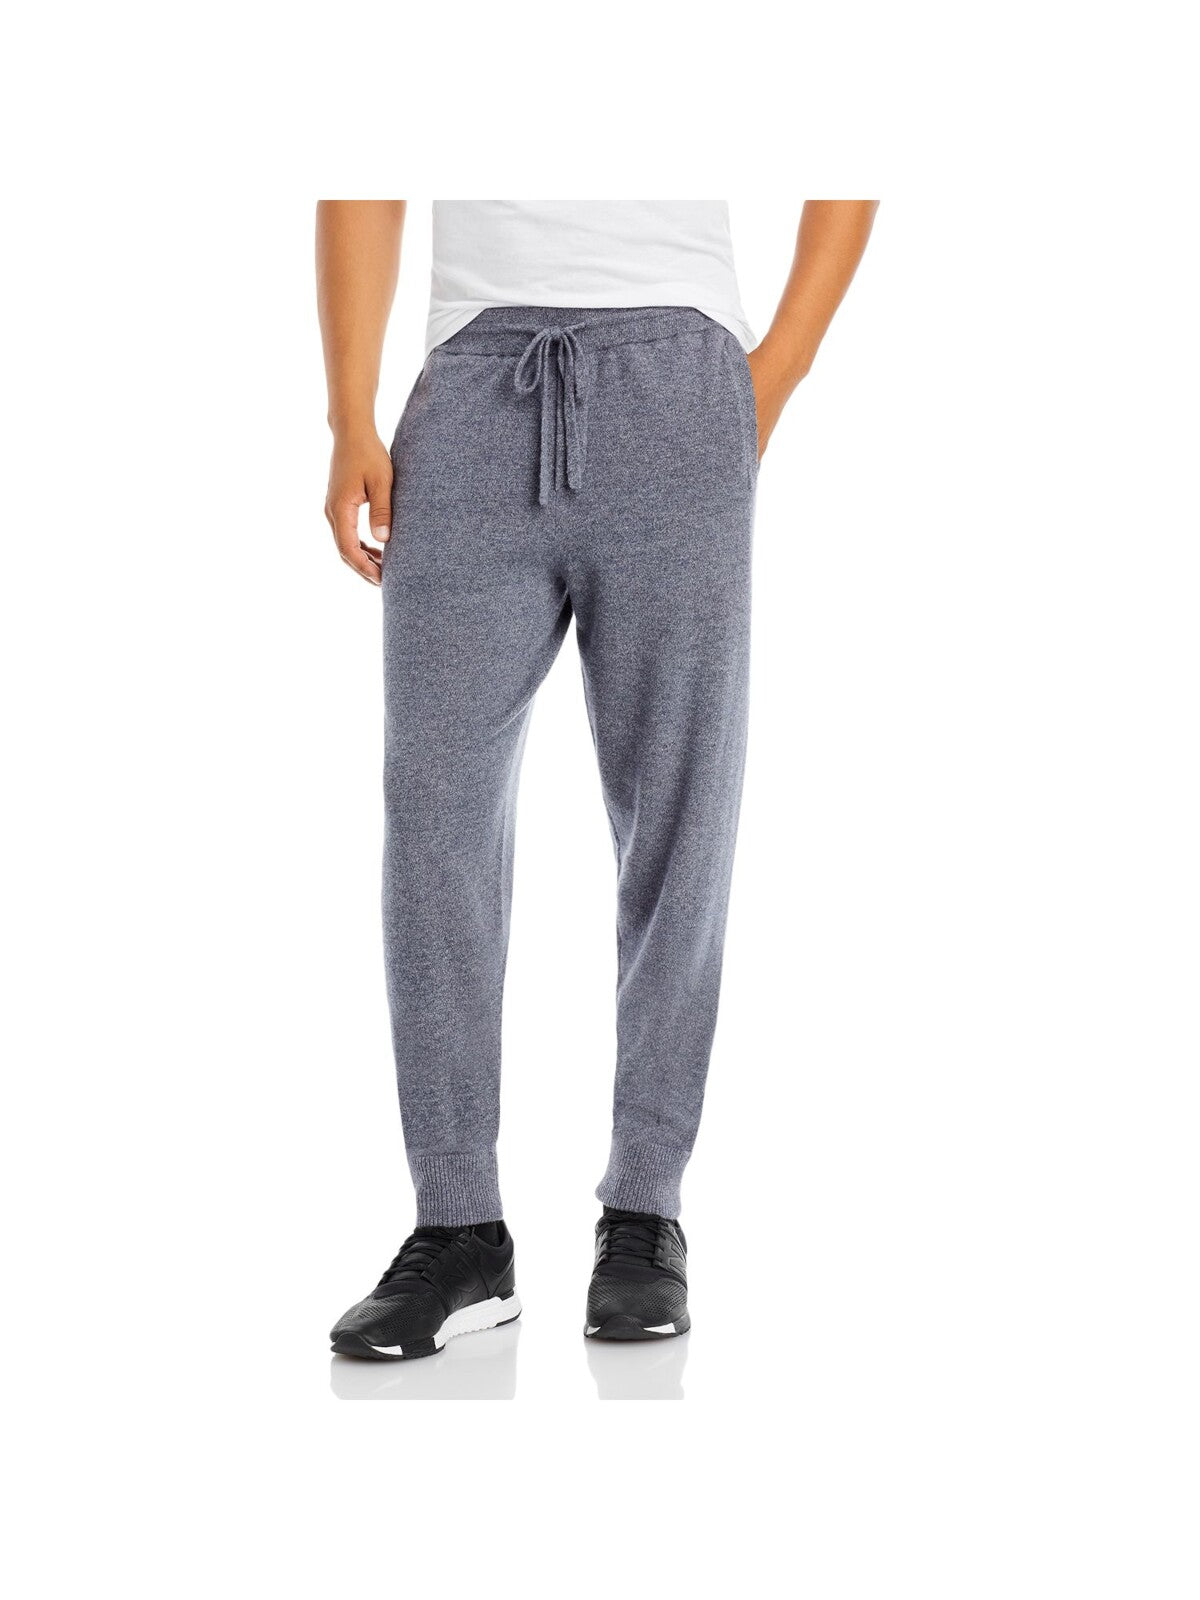 THE MENS STORE Mens Gray Heather Cashmere Joggers L